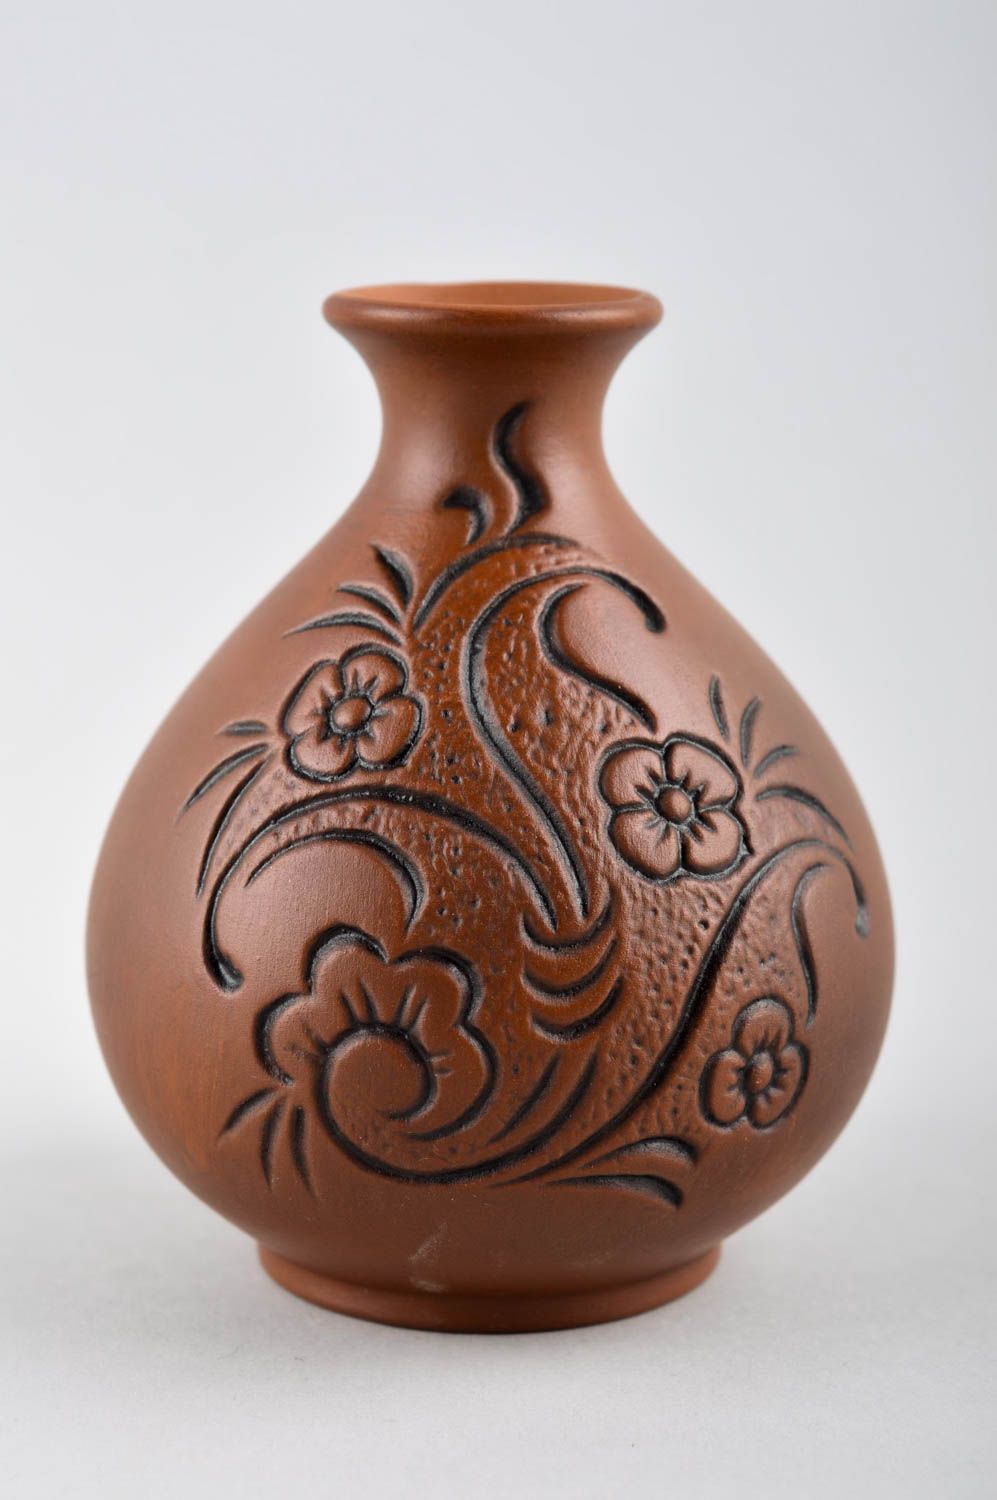 15 oz ceramic wine carafe with hand carvings in floral design 0,3 lb photo 2